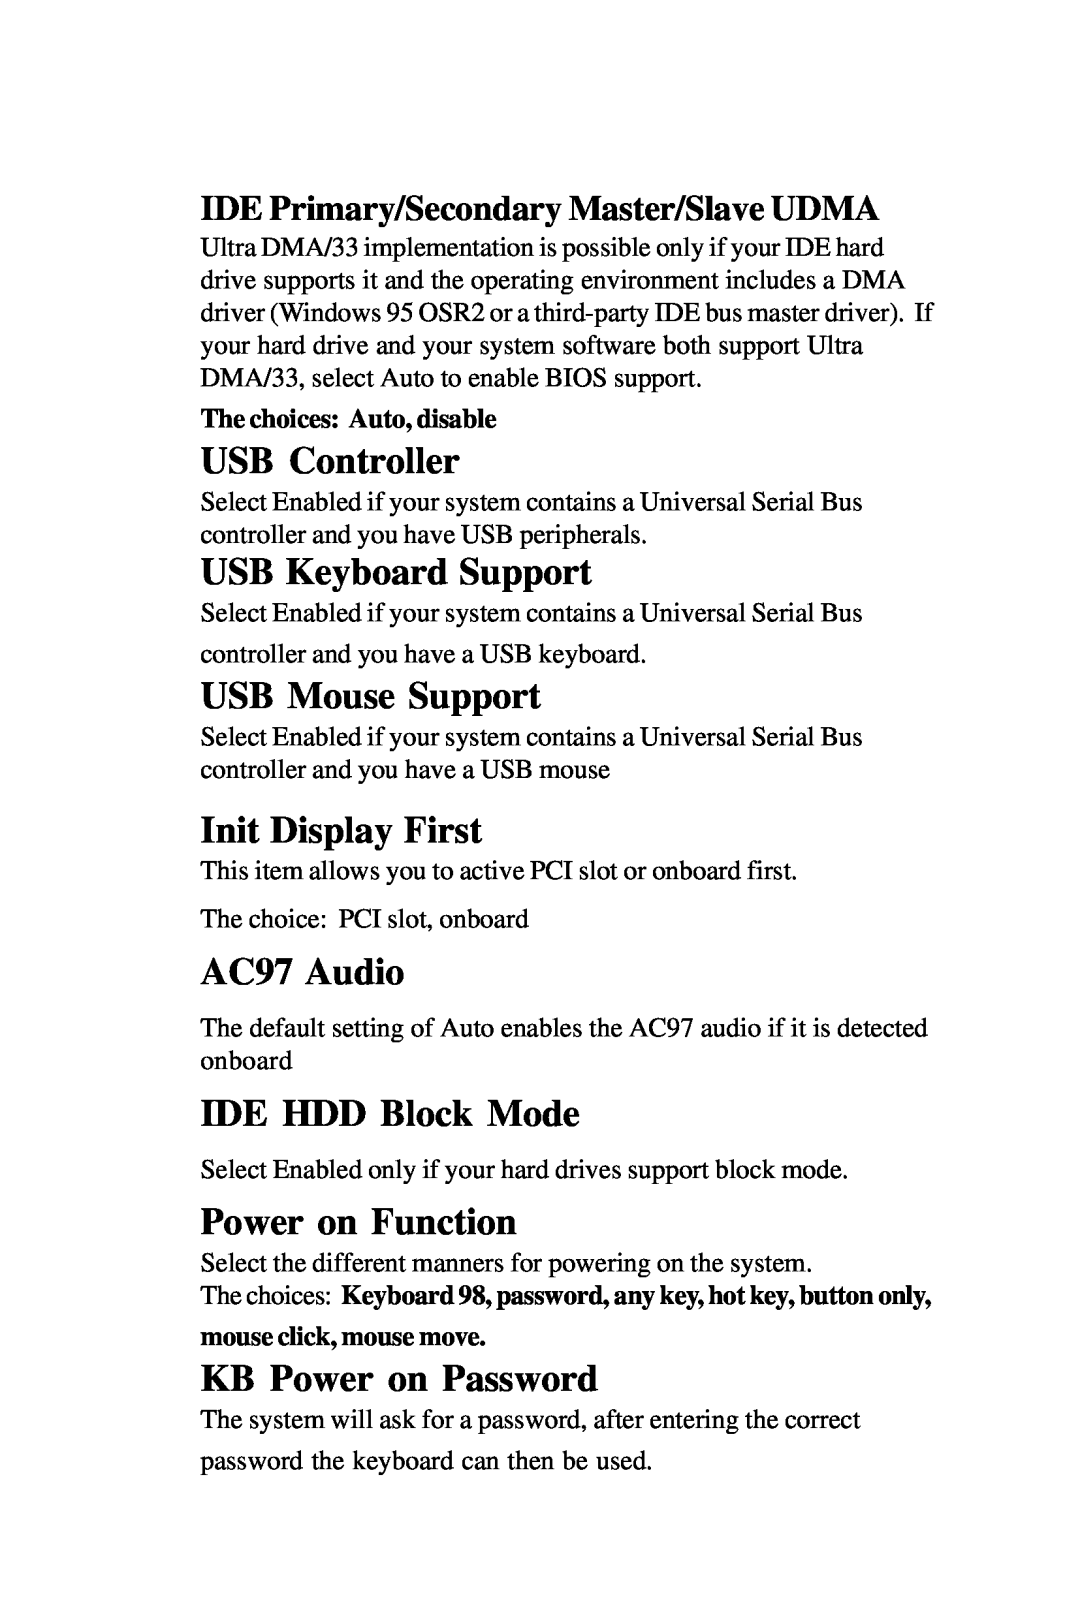 Intel PCM-6896 USB Controller, USB Keyboard Support, USB Mouse Support, Init Display First, AC97 Audio, IDE HDD Block Mode 